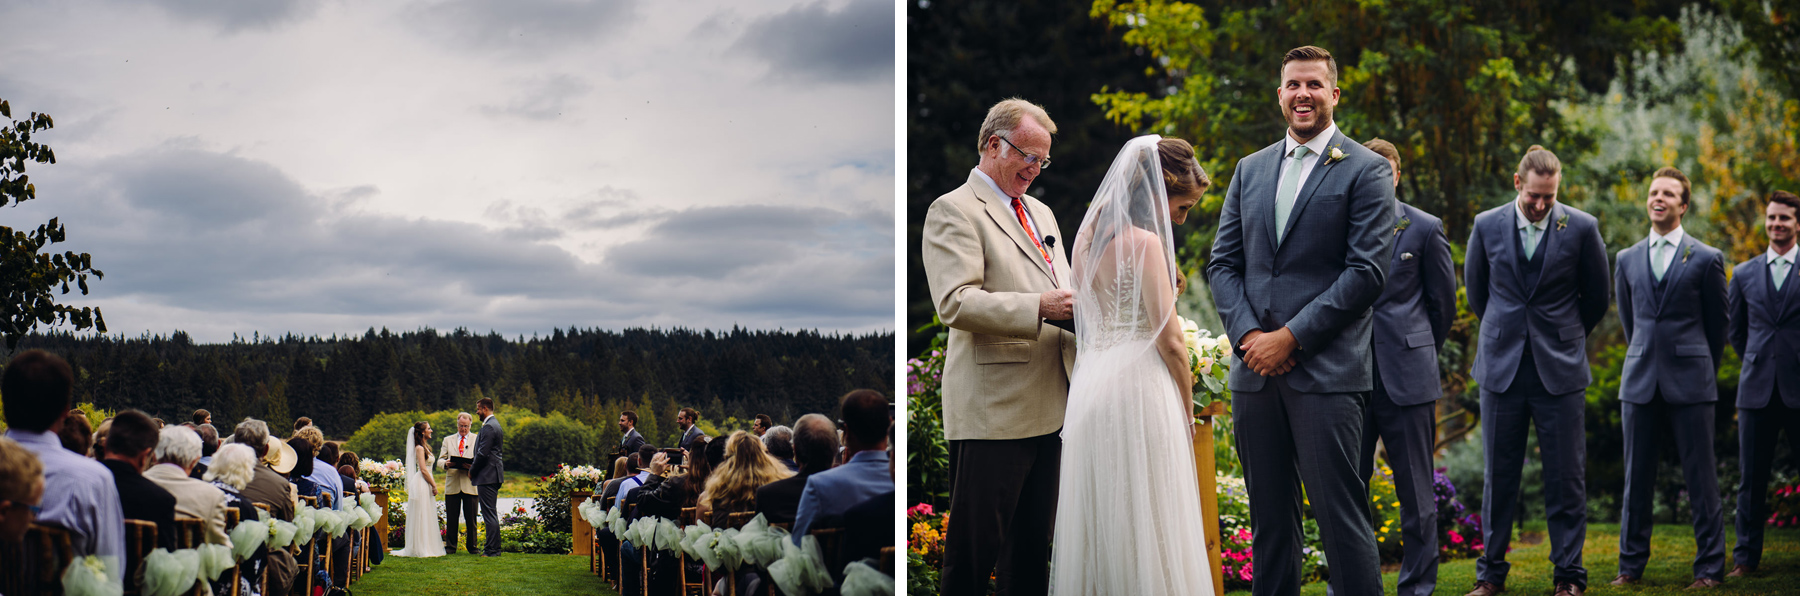 whidbey-island-fireseed-catering-wedding-32